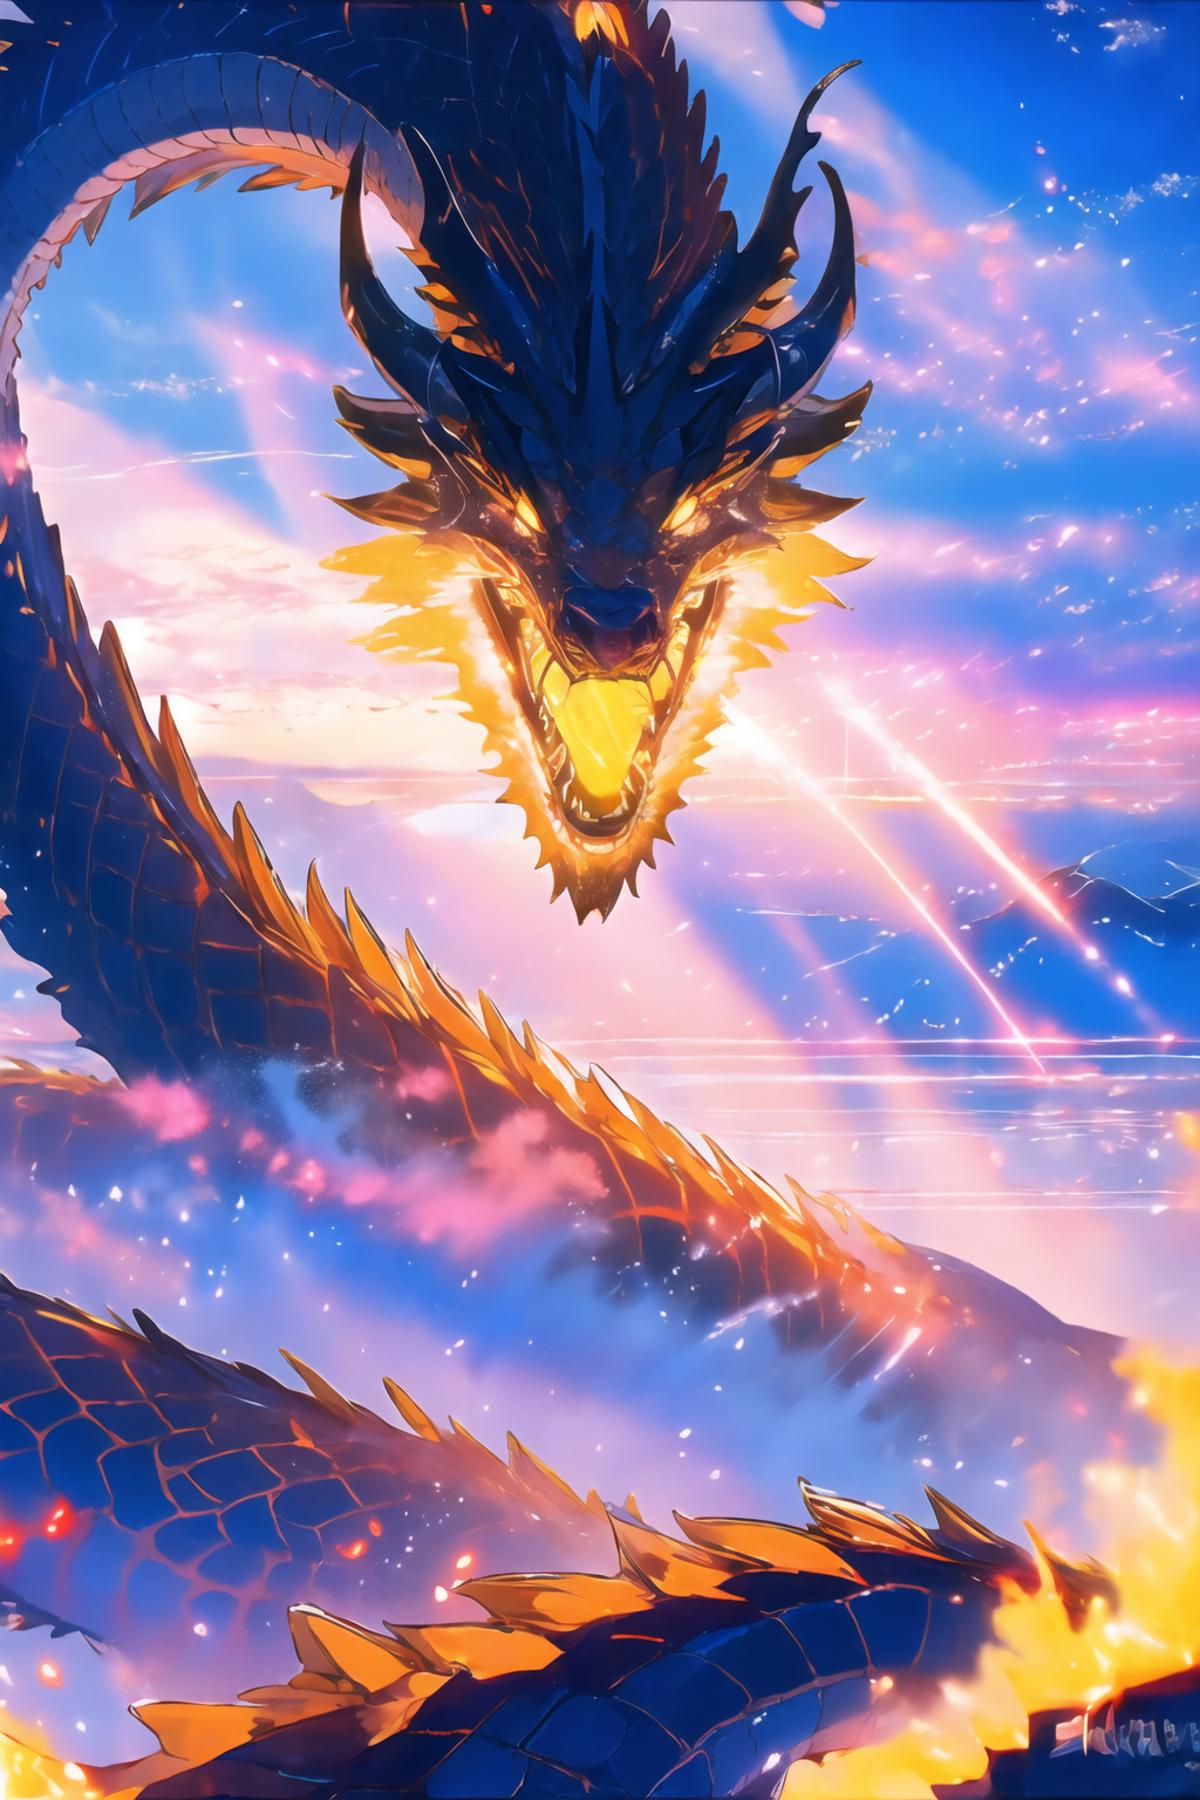 A Dragon with Glowing Eyes and a Fire Breath, Flying in the Sky